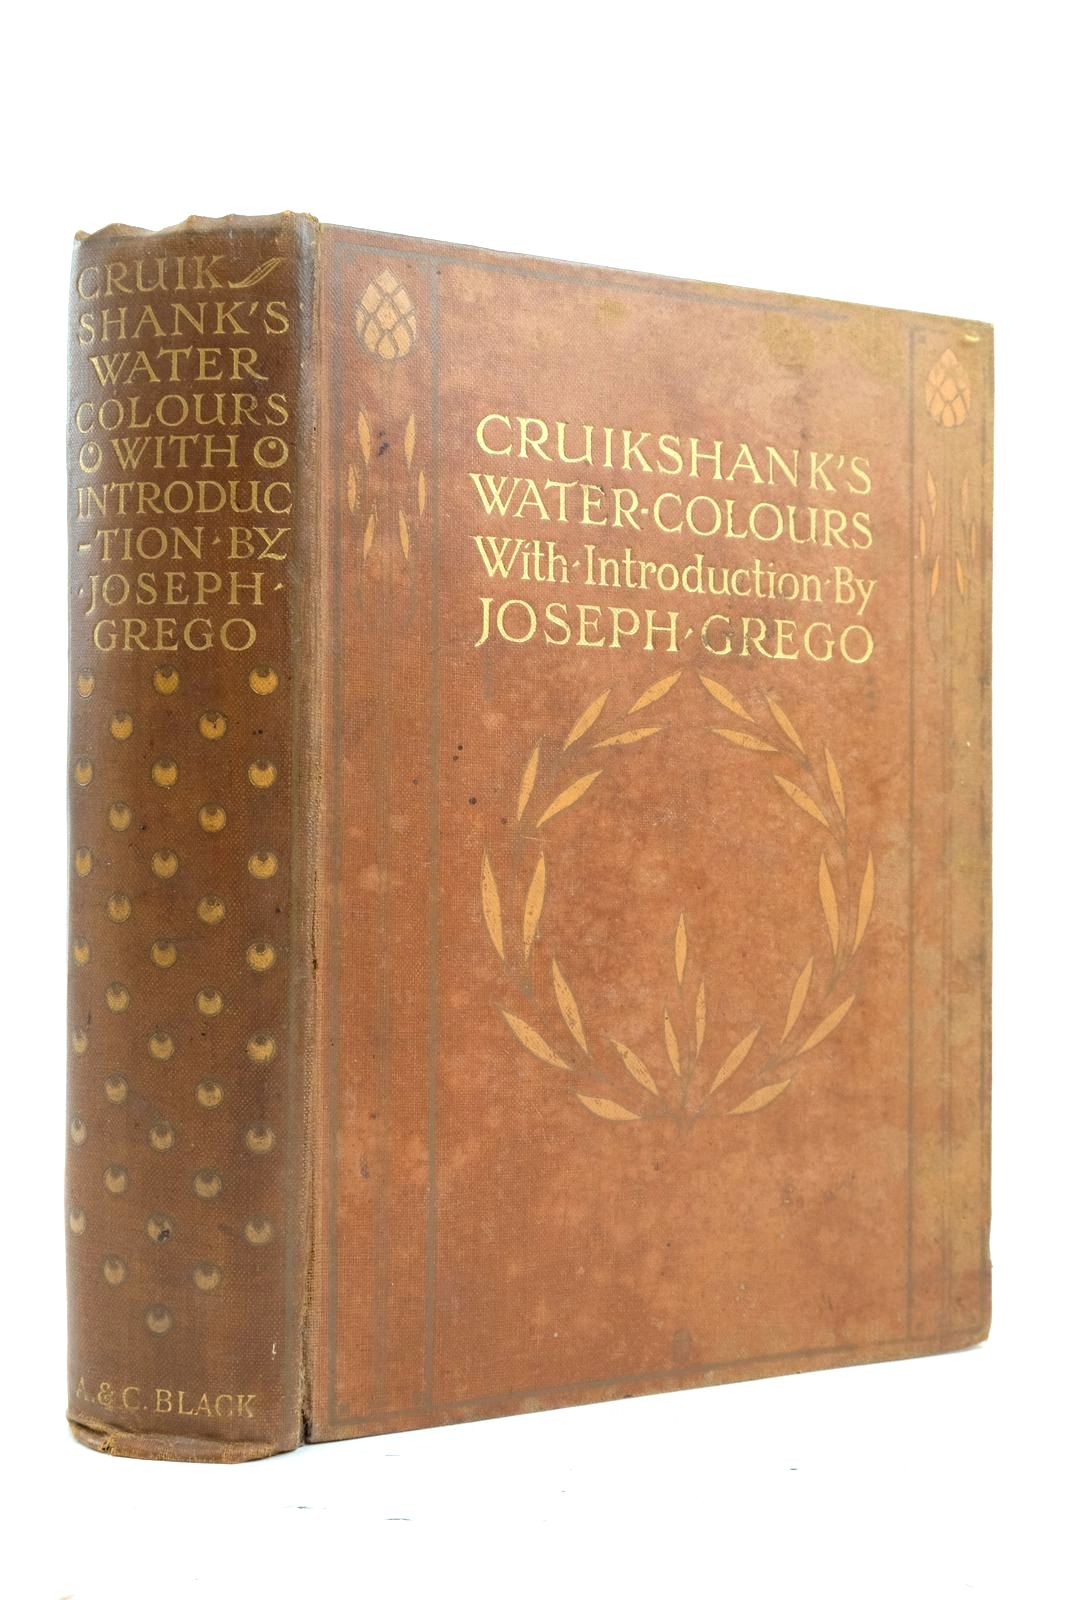 Photo of CRUIKSHANK'S WATER COLOURS written by Grego, Joseph Dickens, Charles Ainsworth, William Harrison Maxwell, W.H. illustrated by Cruikshank, George published by A. &amp; C. Black (STOCK CODE: 2137011)  for sale by Stella & Rose's Books